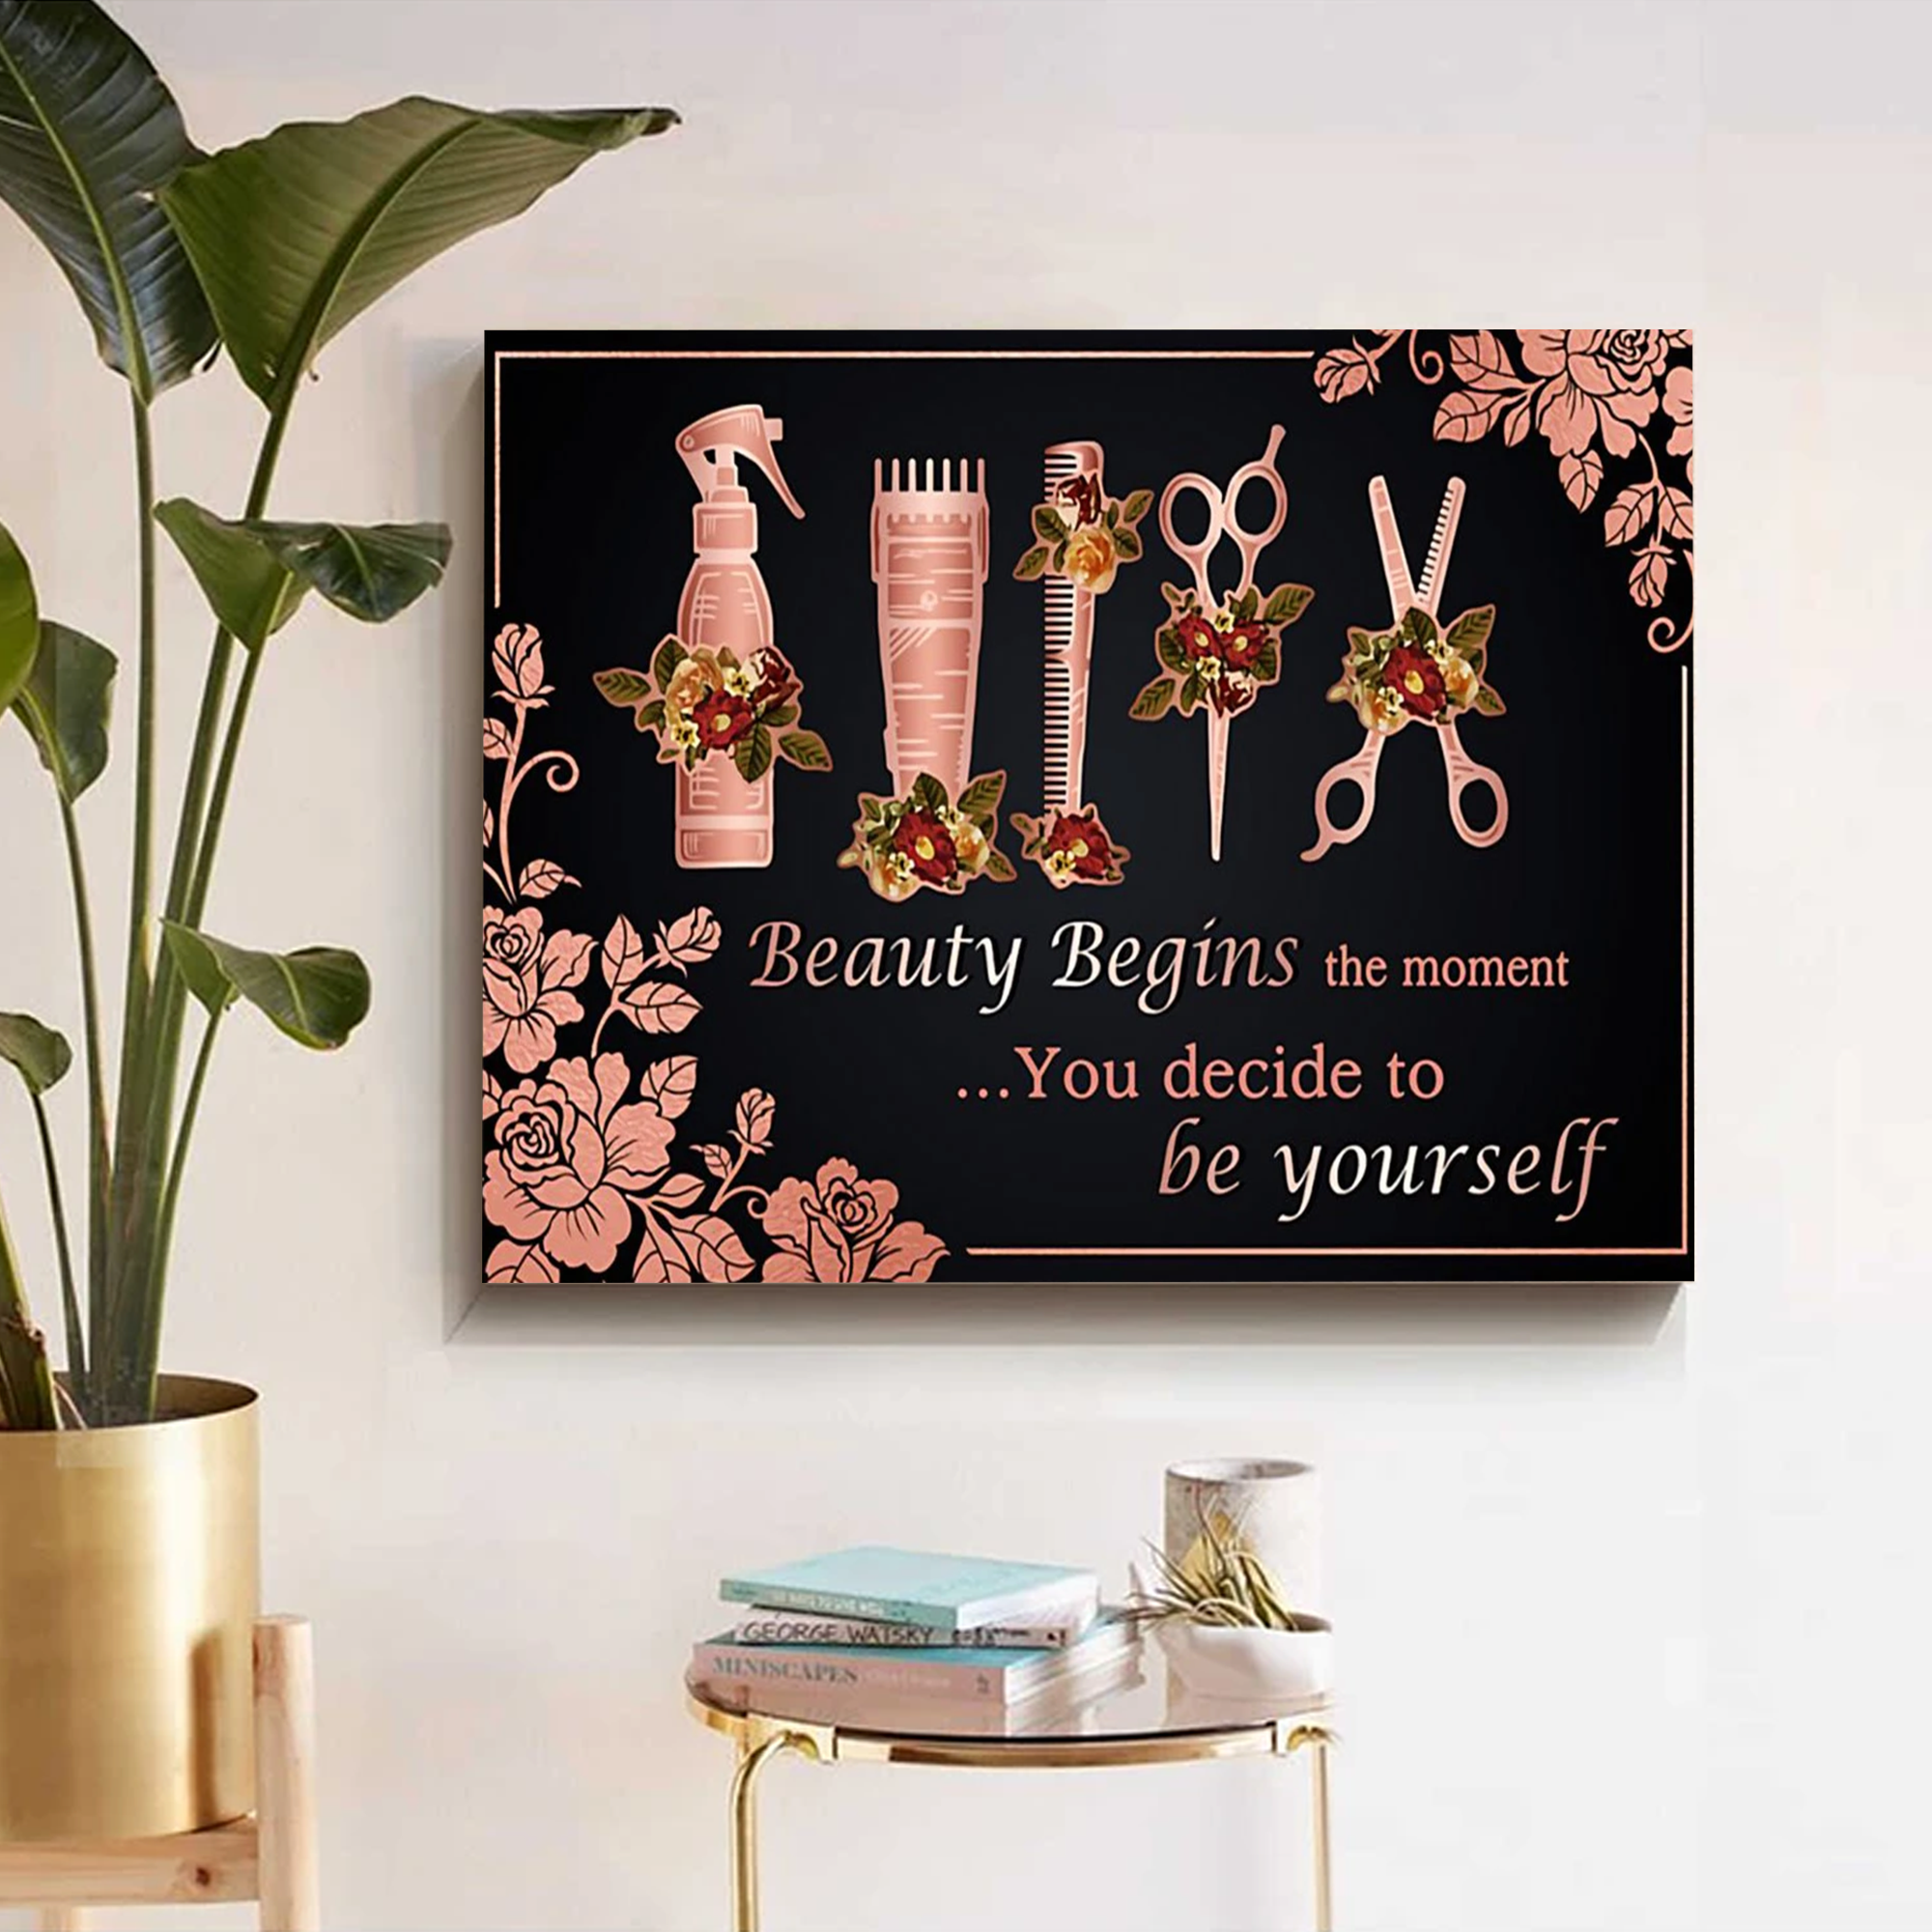 Hairstylist Canvas Wall Art – Beauty Begins The Moment You Decide To Be Yourself